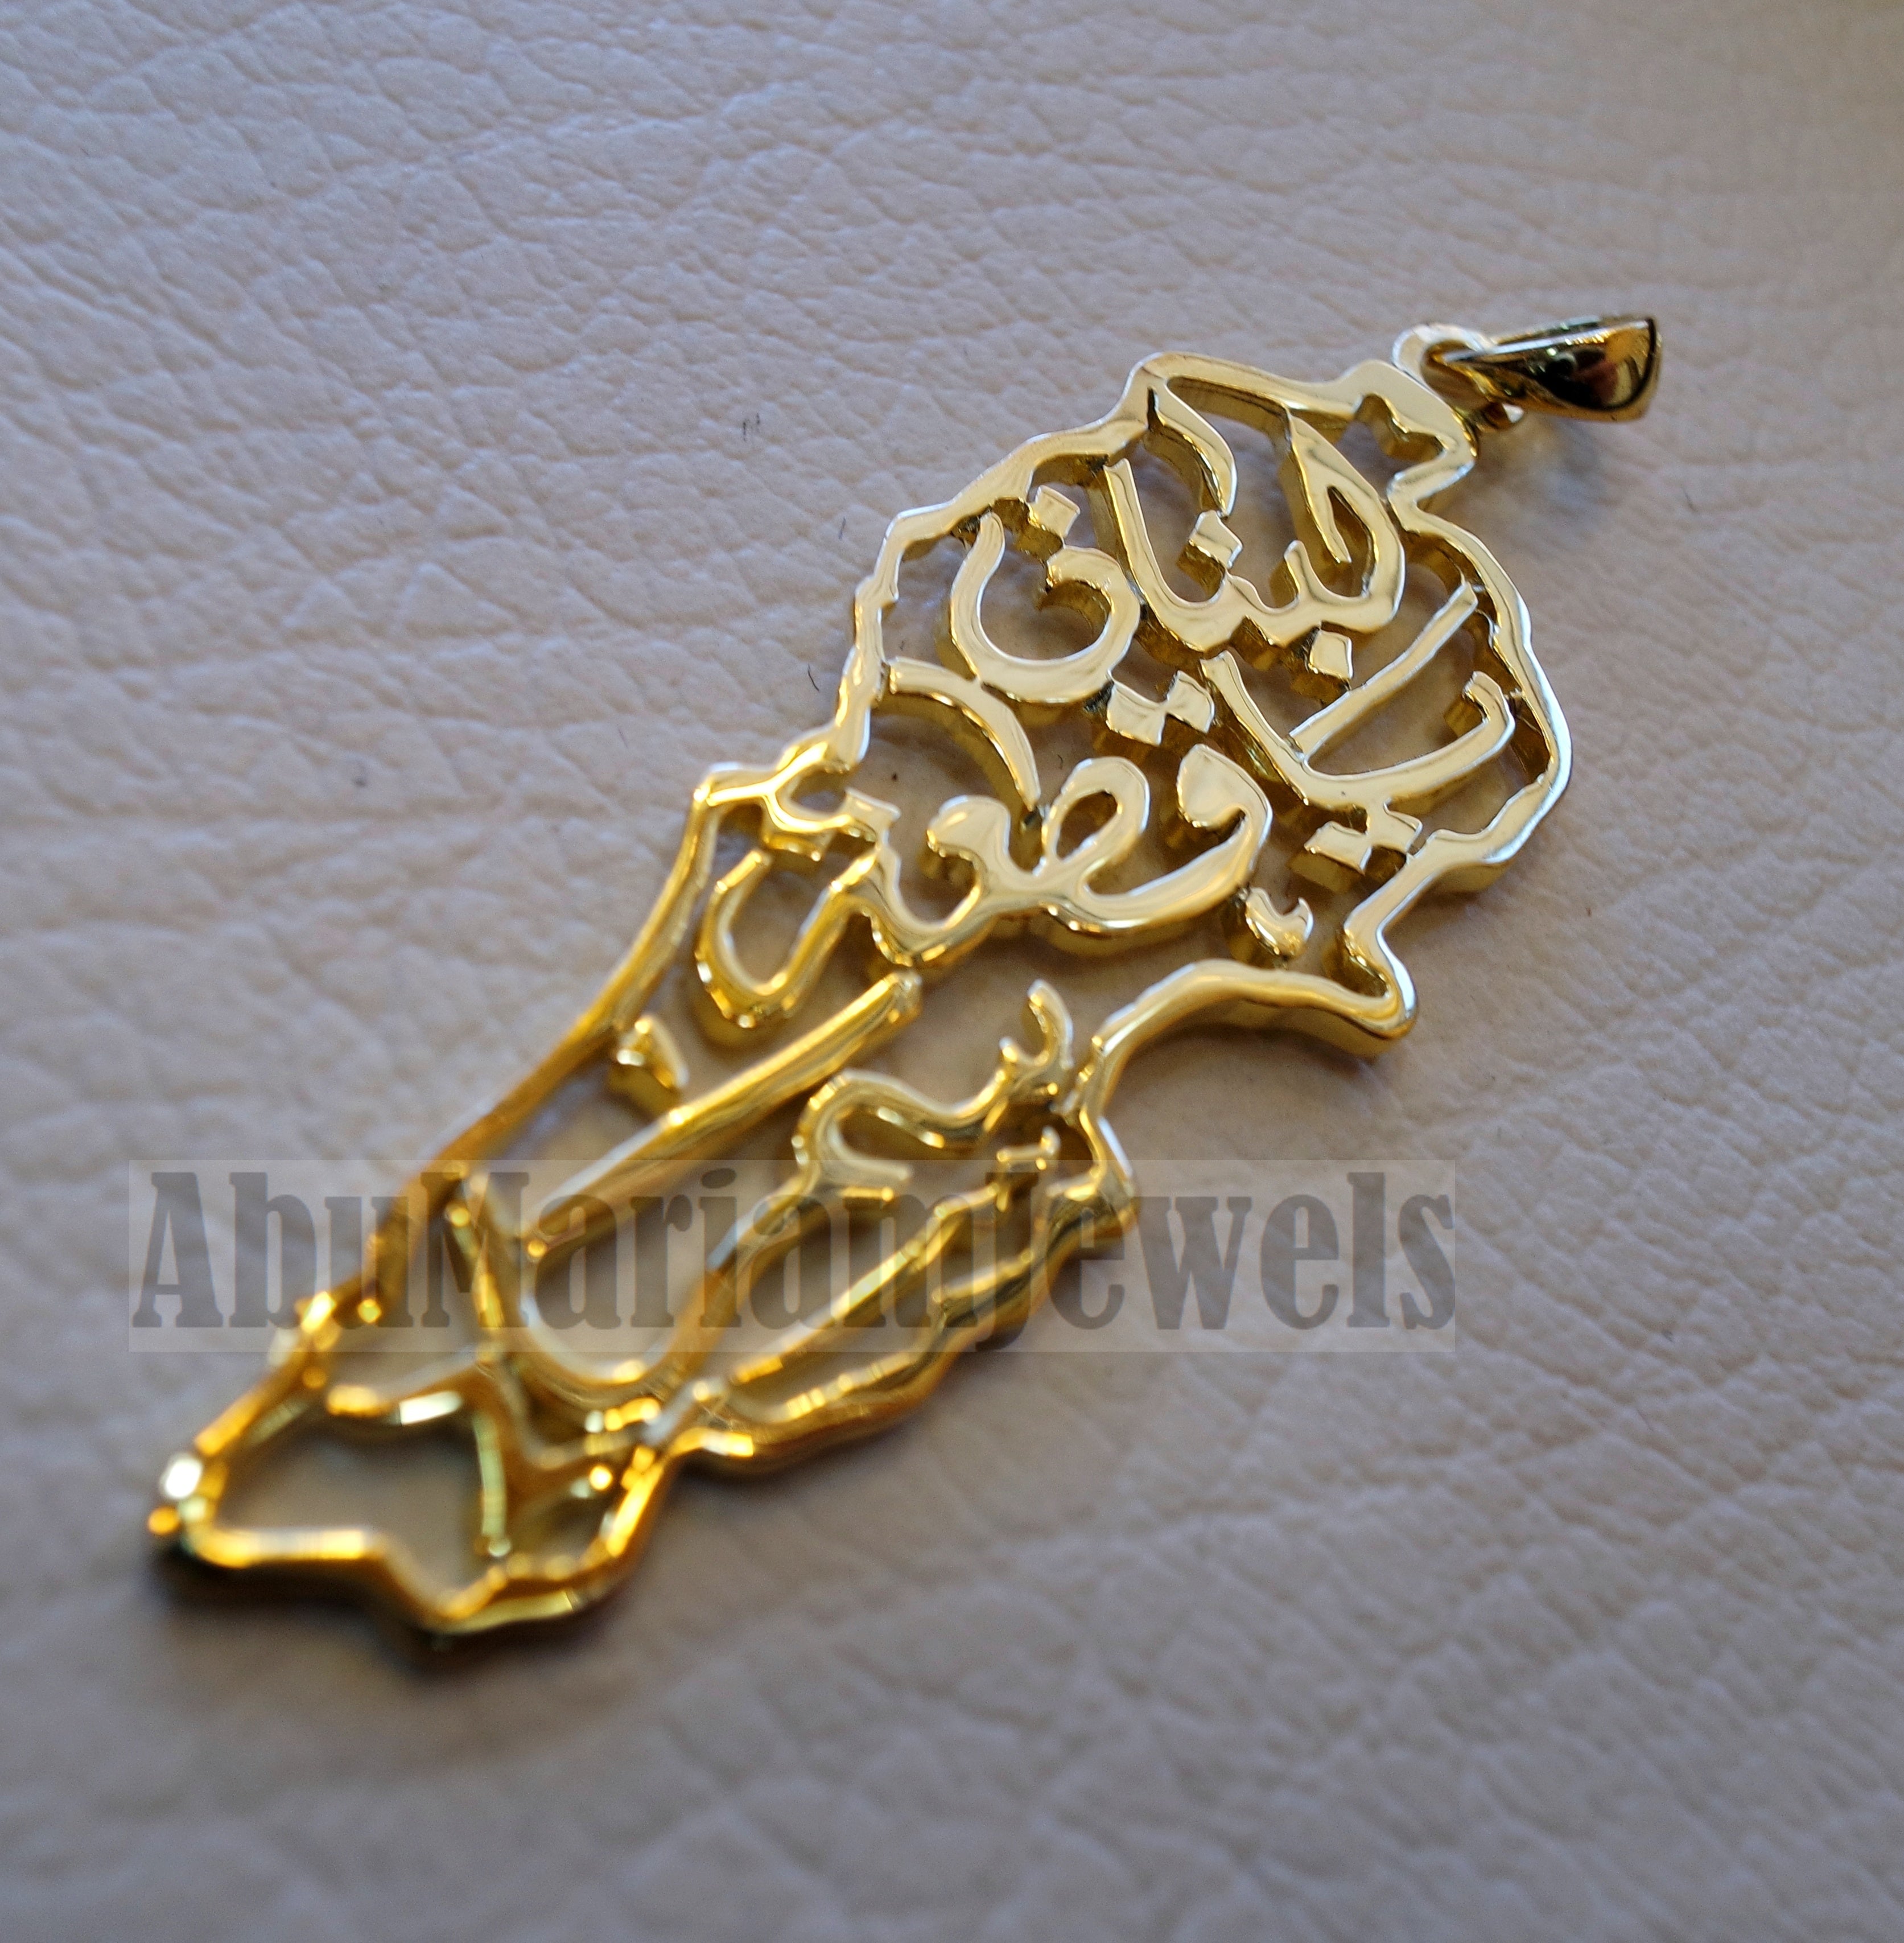 Lebanon map pendant with famous calligraphy 18K gold fine jewelry arabic fast shipping خريطة لبنان